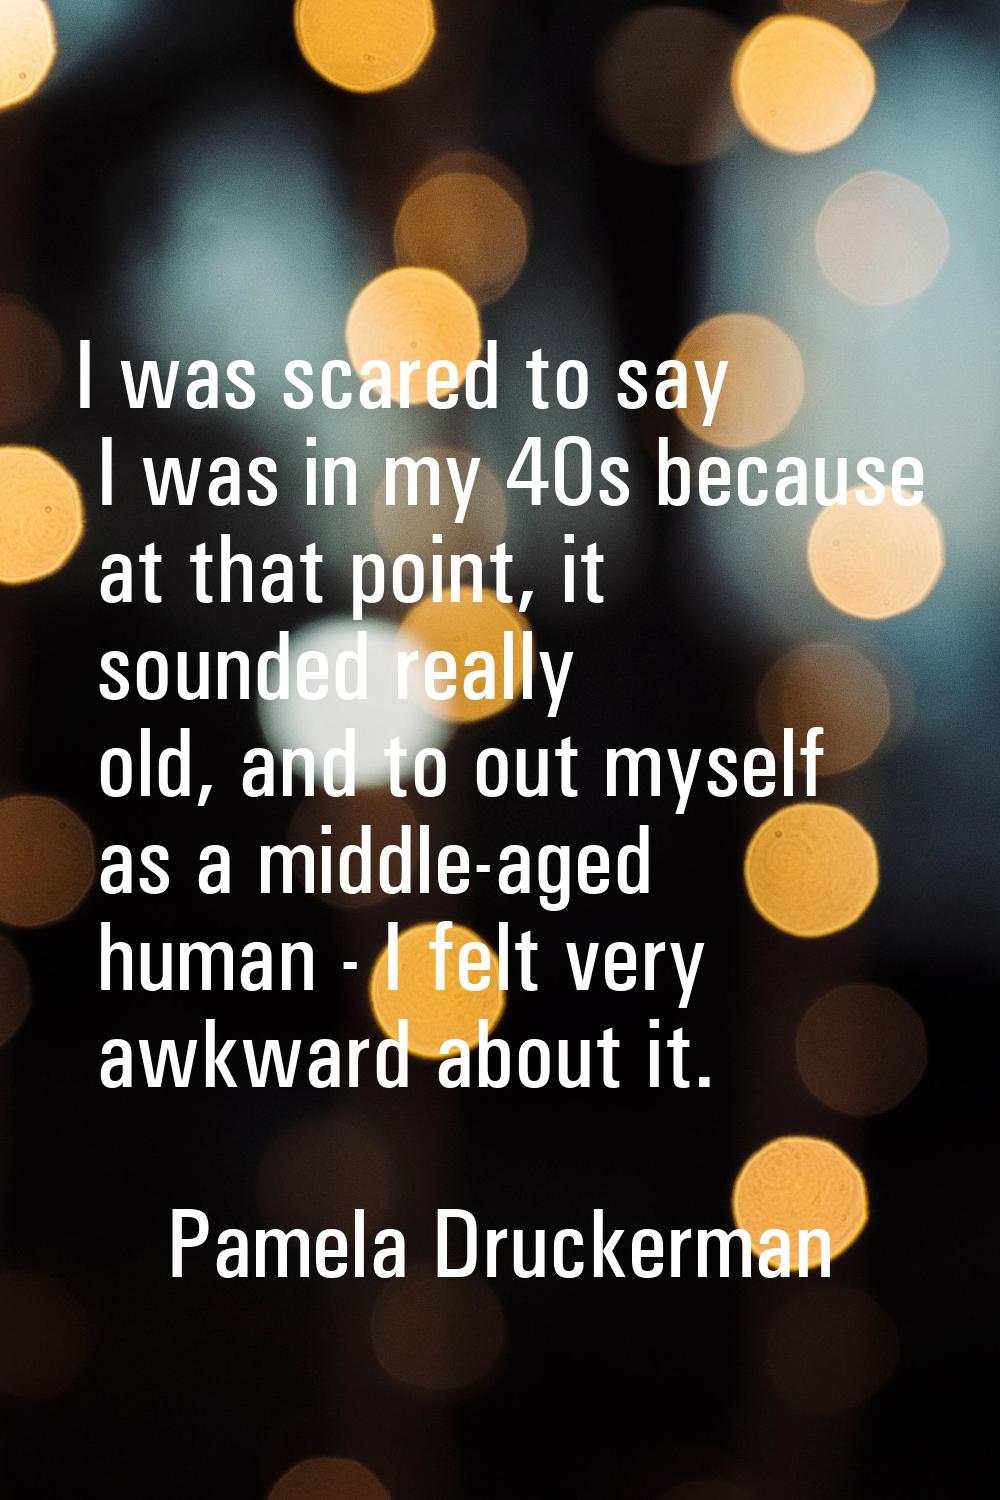 I was scared to say I was in my 40s because at that point, it sounded really old, and to out myself